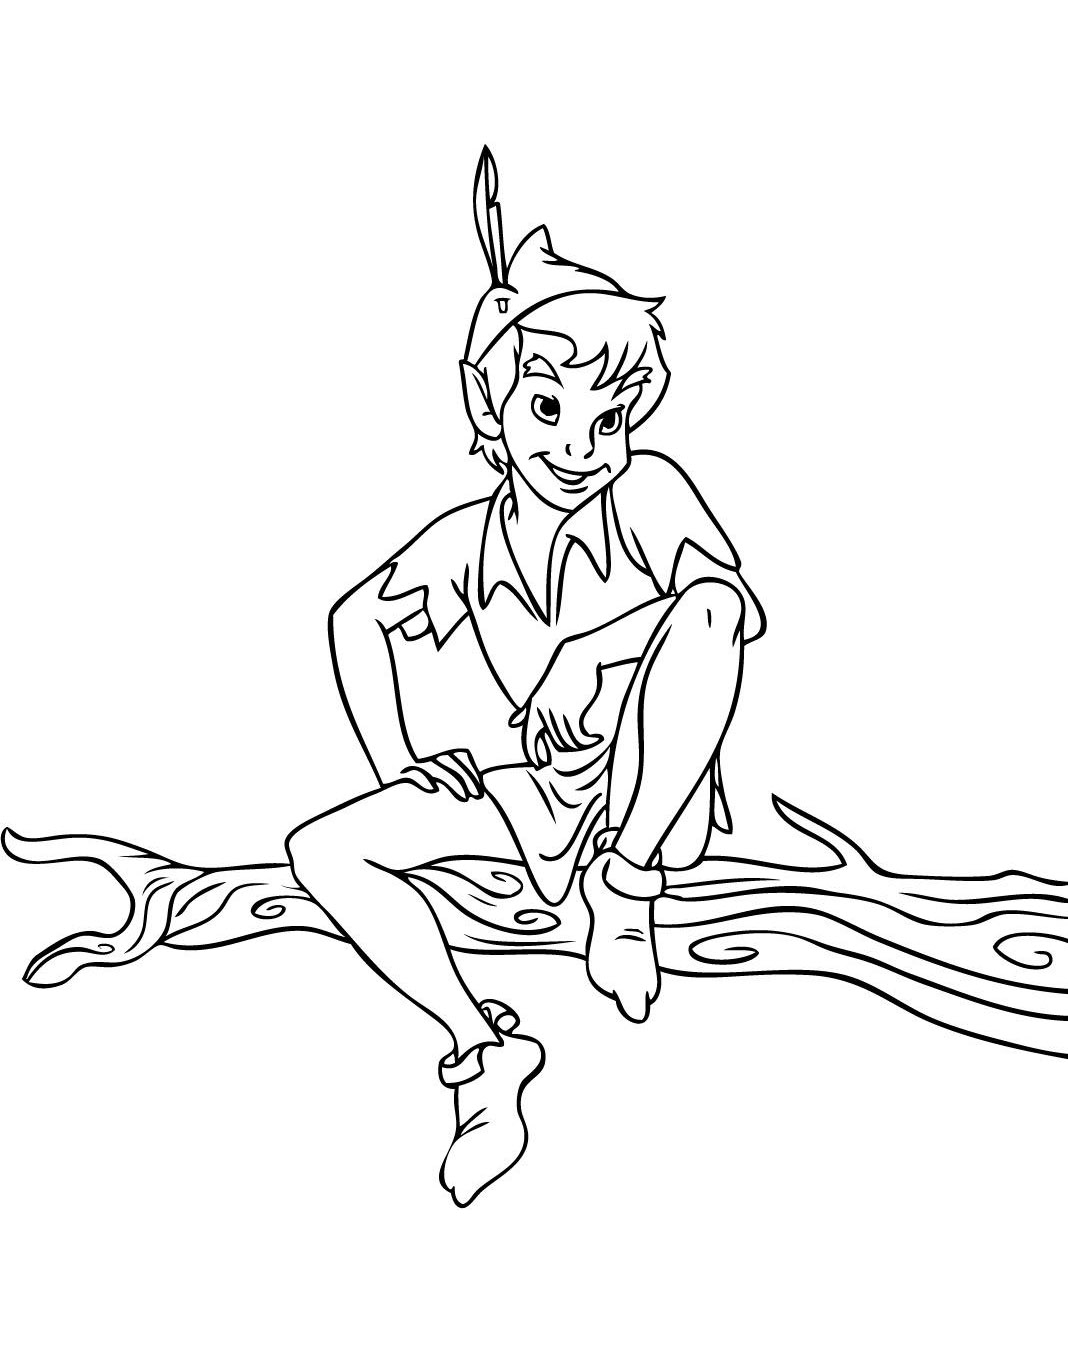 Funny Peter Pan coloring page for kids